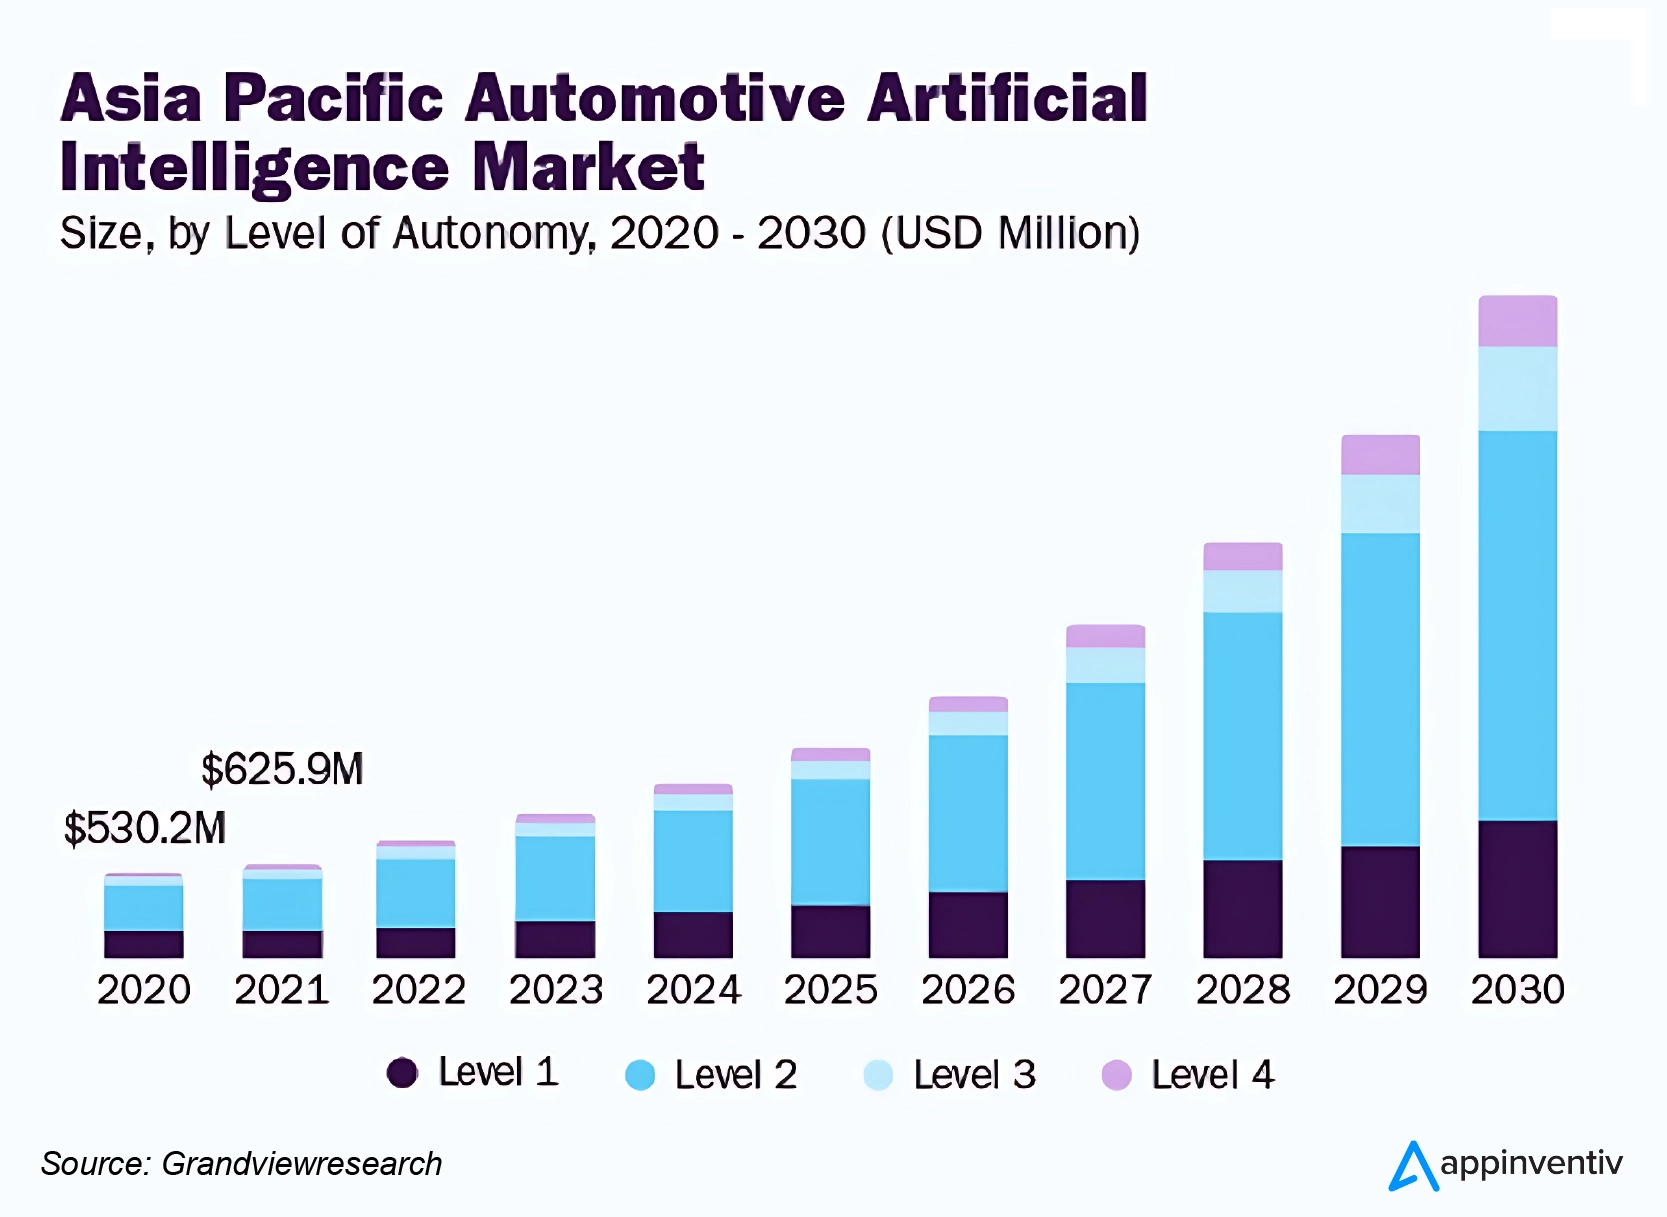 Global growth in automotive AI market